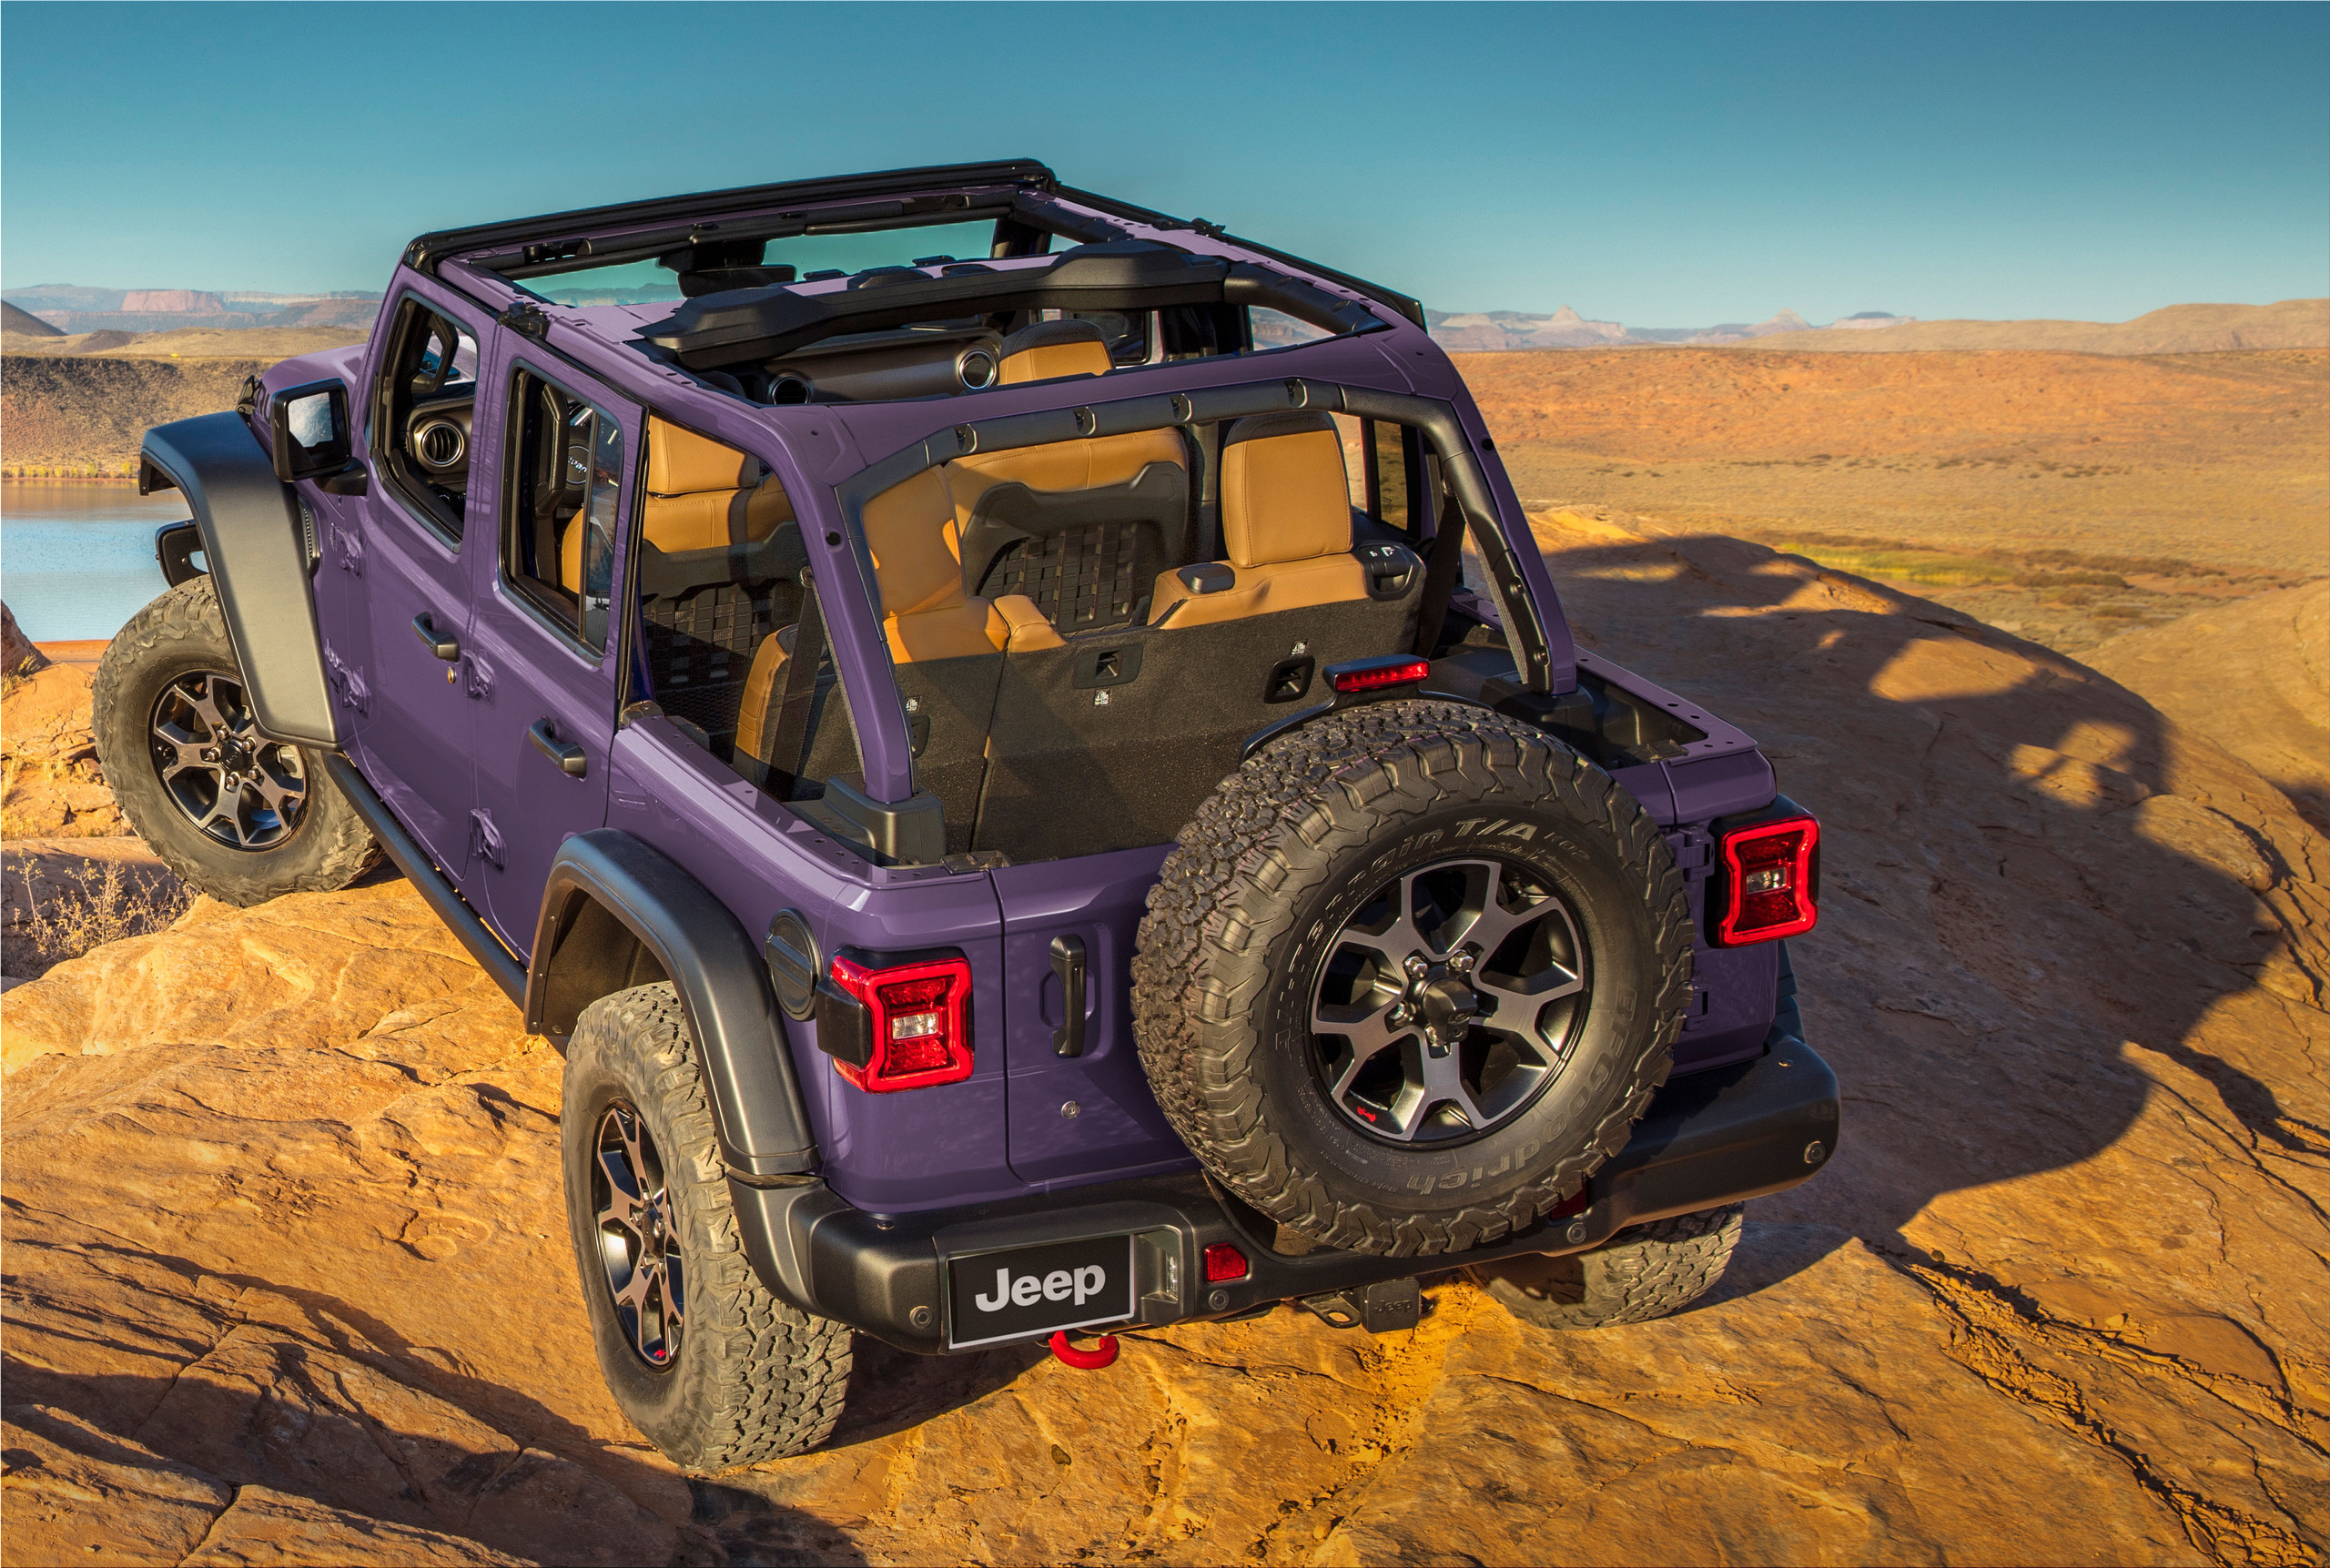 The Jeep Wrangler now comes in two new colors | Zateza